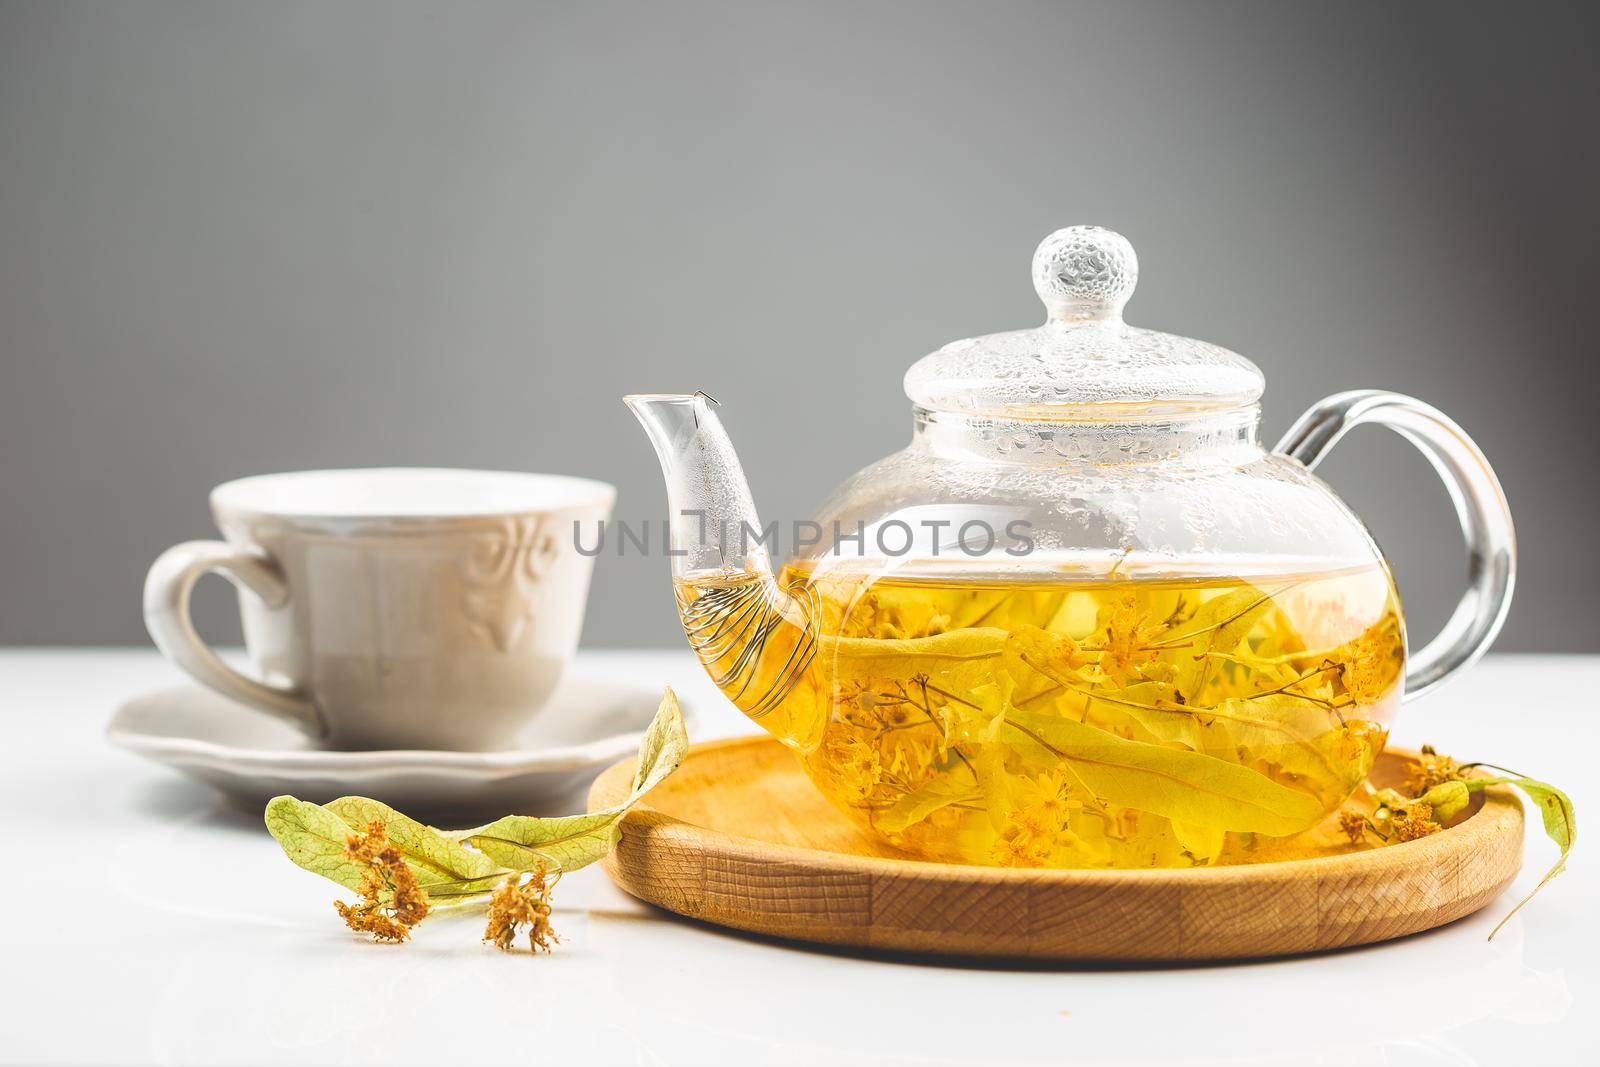 Healthy linden or tilia flower tea in the tea pot by Syvanych